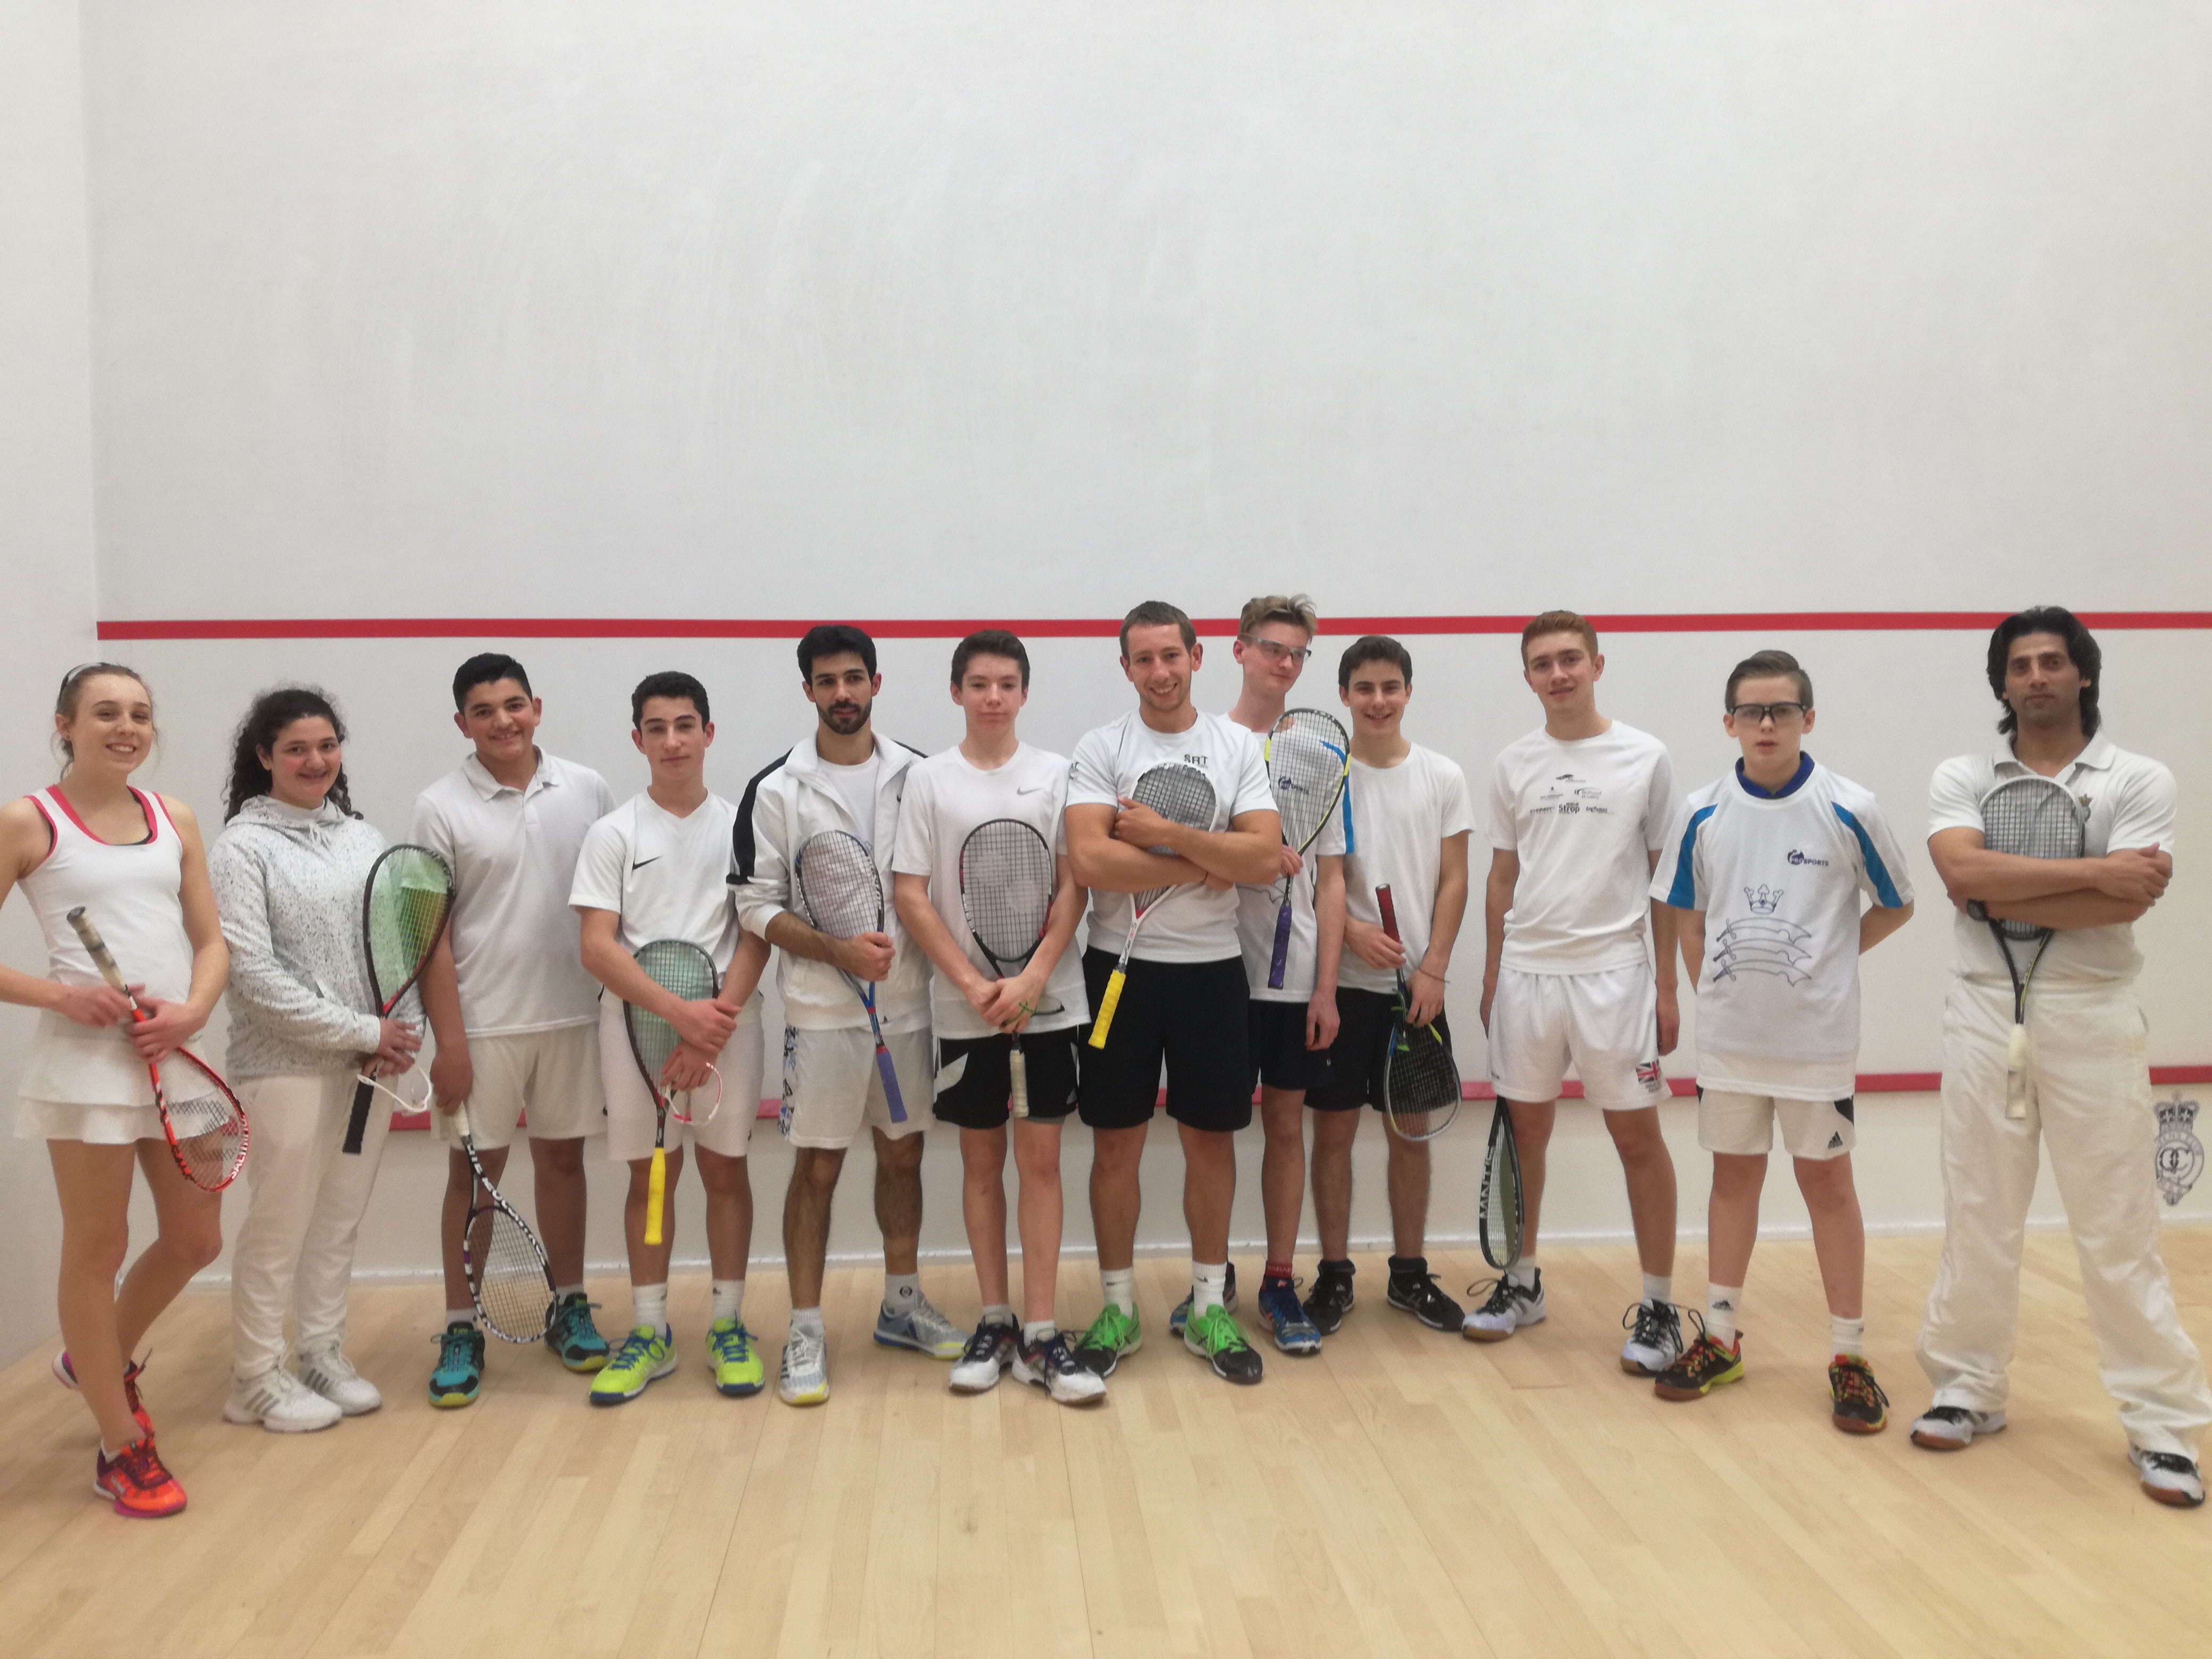 Middlesex Juniors Show “How it’s Done” at the County Training Sessions this weekend.